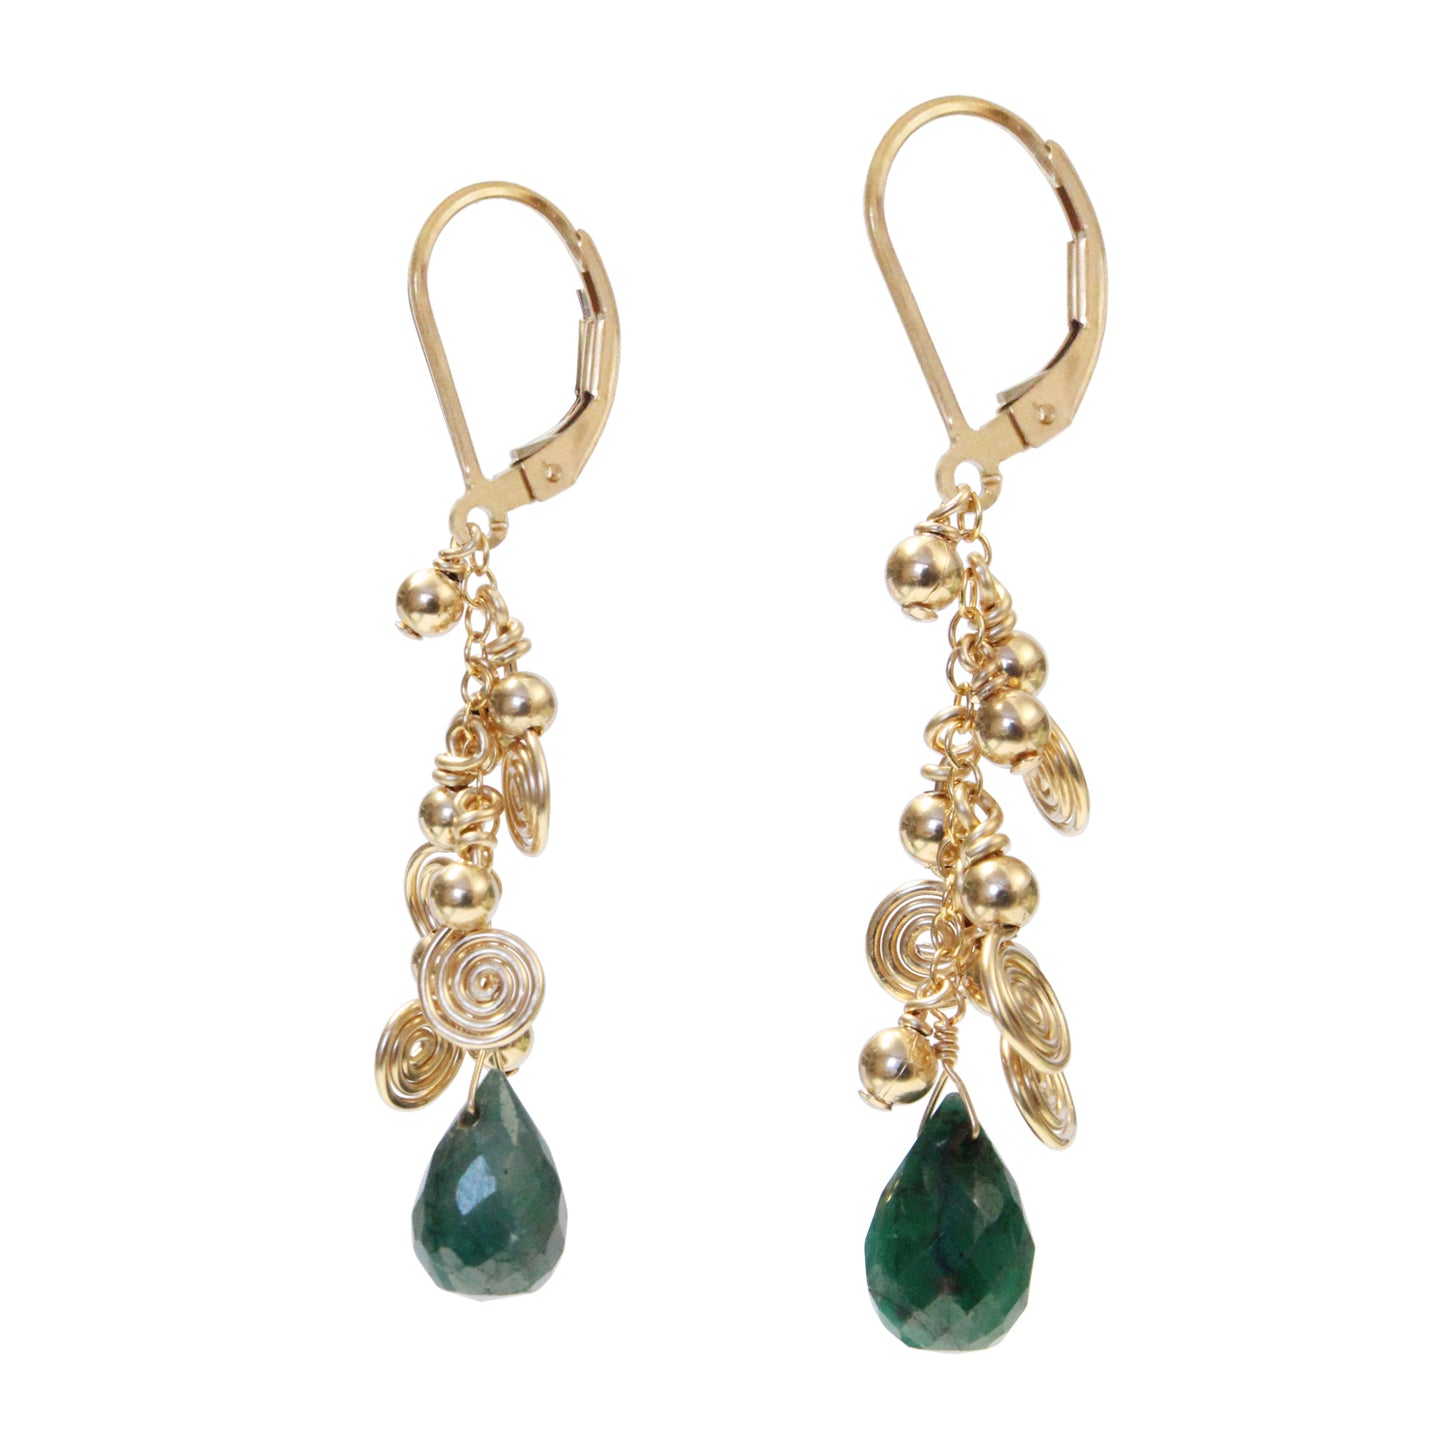 Emerald Cascade Earrings with galaxy spirals / 50mm length / gold filled leverback earwires